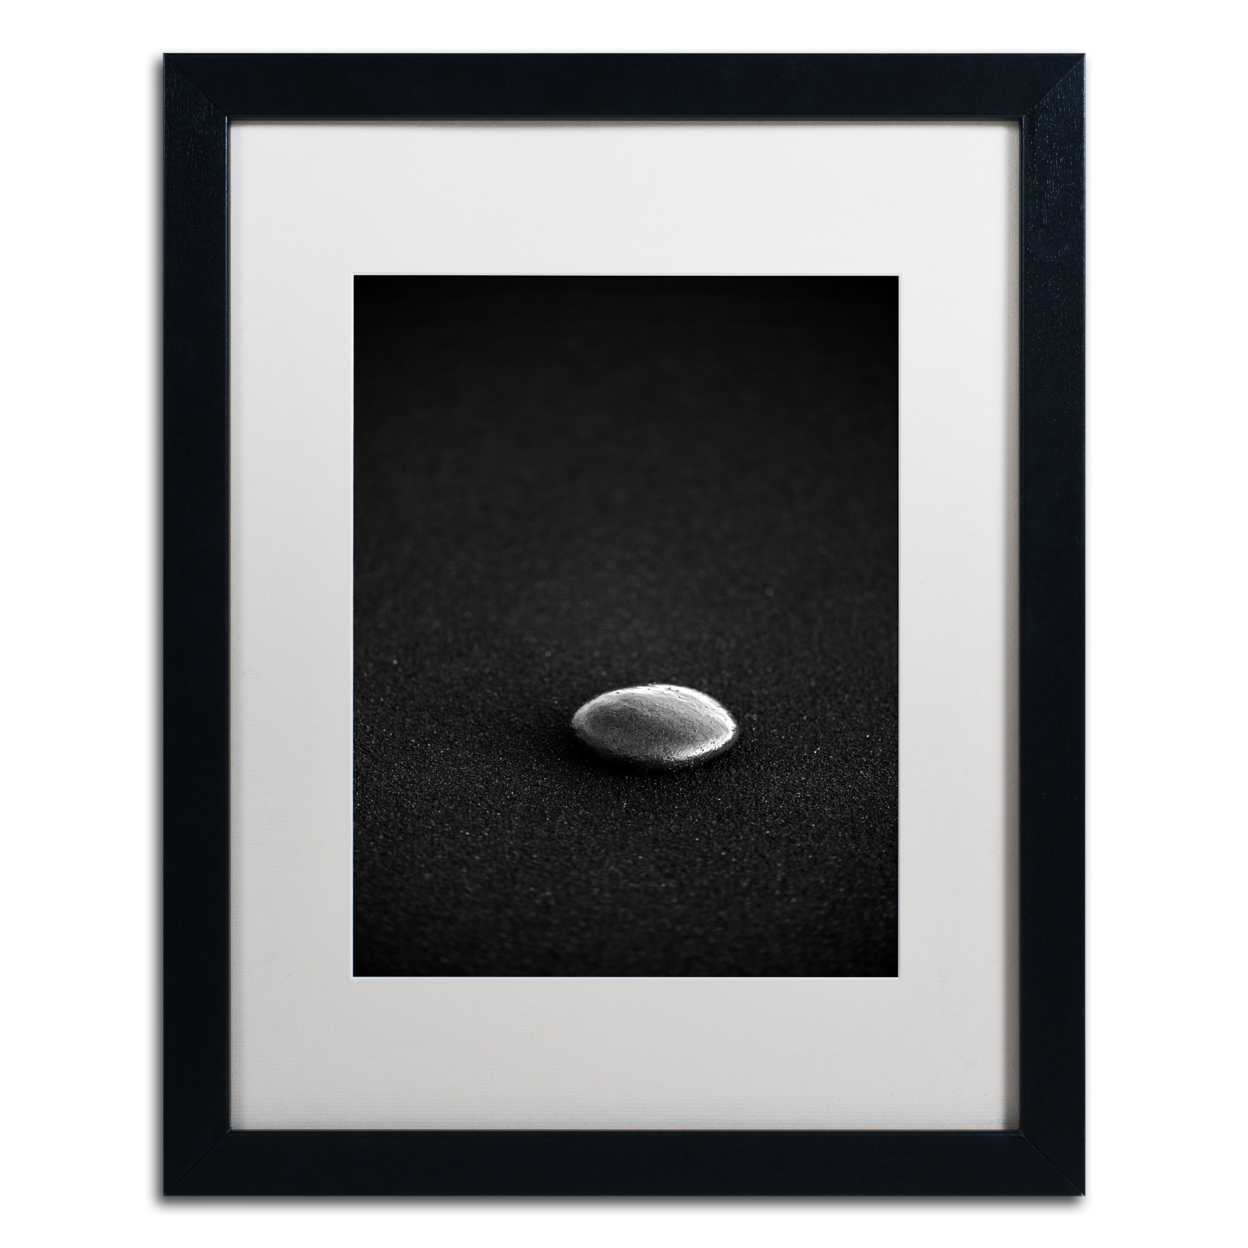 Philippe Sainte-Laudy 'Black Stone' Black Wooden Framed Art 18 X 22 Inches